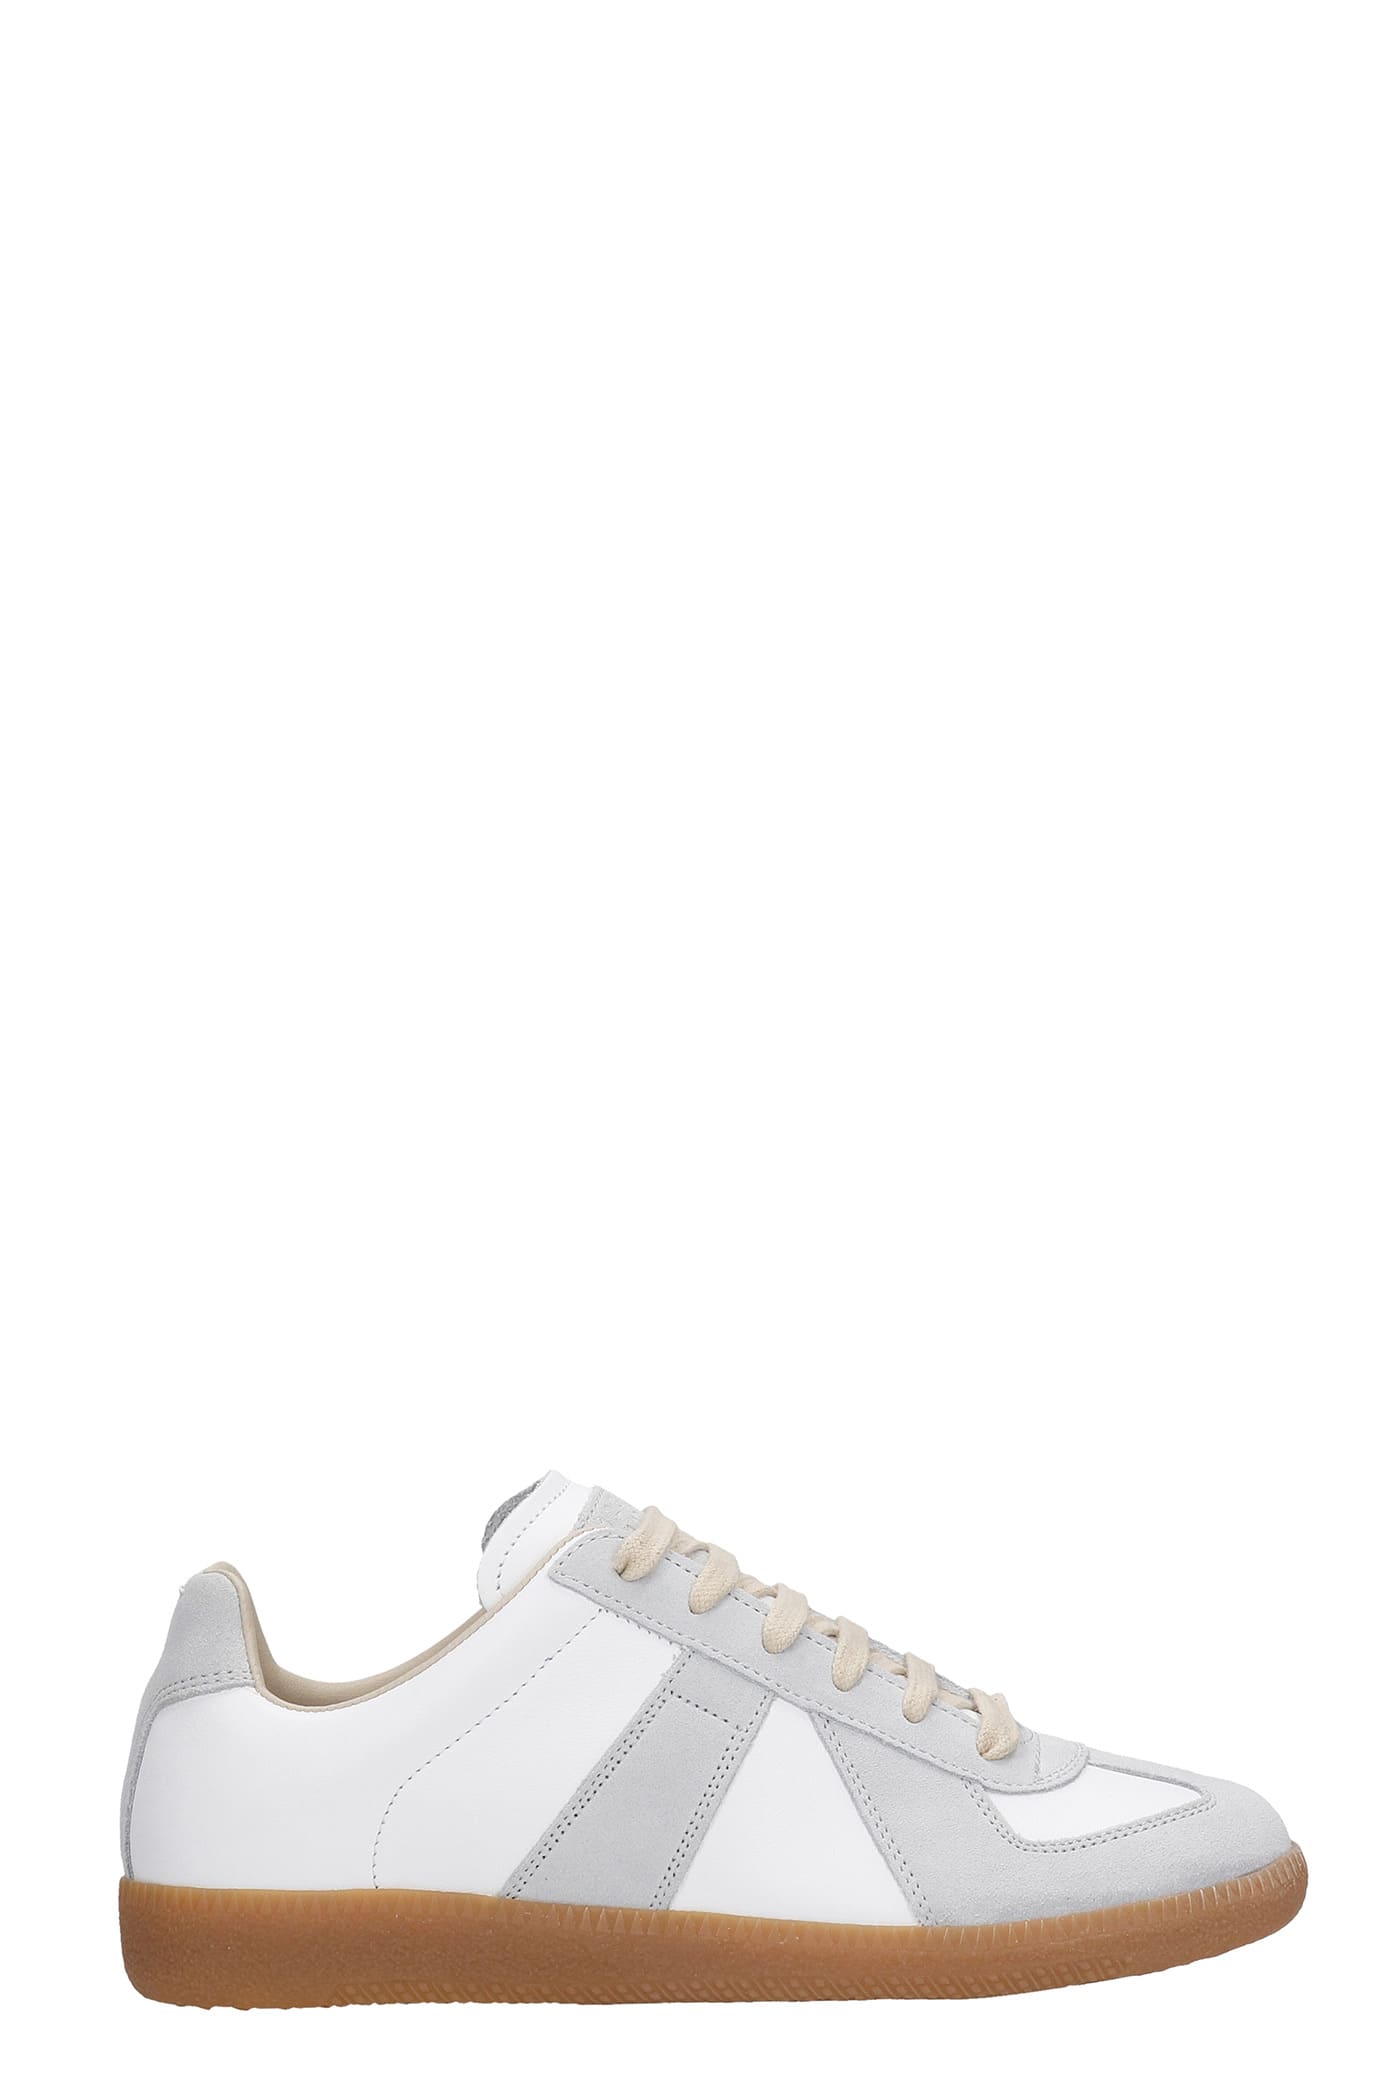 Buy Maison Margiela Replica Sneakers In White Leather online, shop Maison Margiela shoes with free shipping